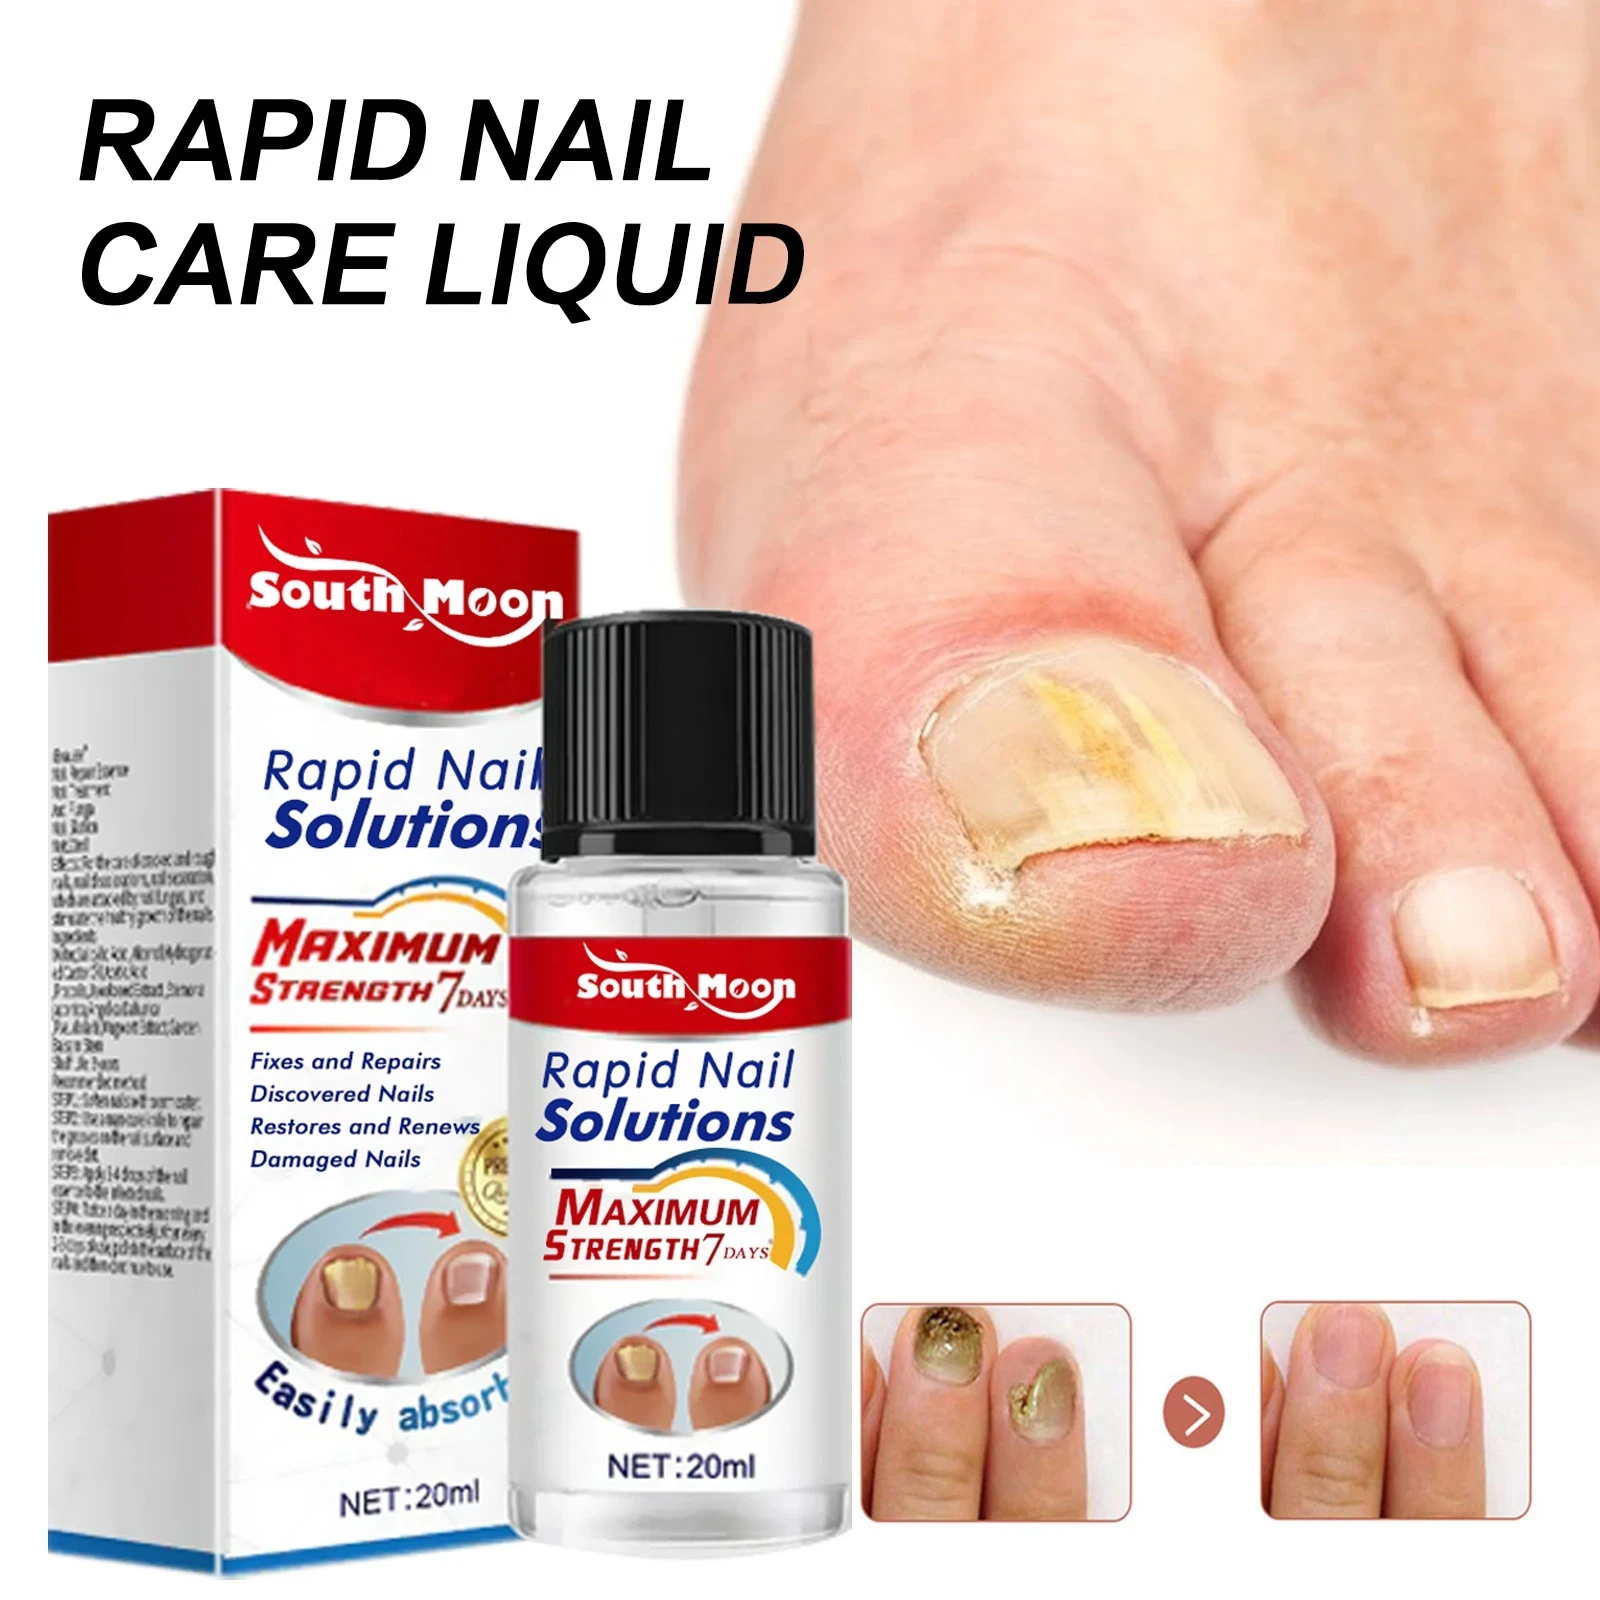 Nail Fungal Treatment Serum Anti Infection Onychomycosis Paronychia Rapid Repair Gel Toe Nail Fungal Fast Removal Hand Foot Care car coating agent high protection car paint coating fast acting stain removal 200ml shine